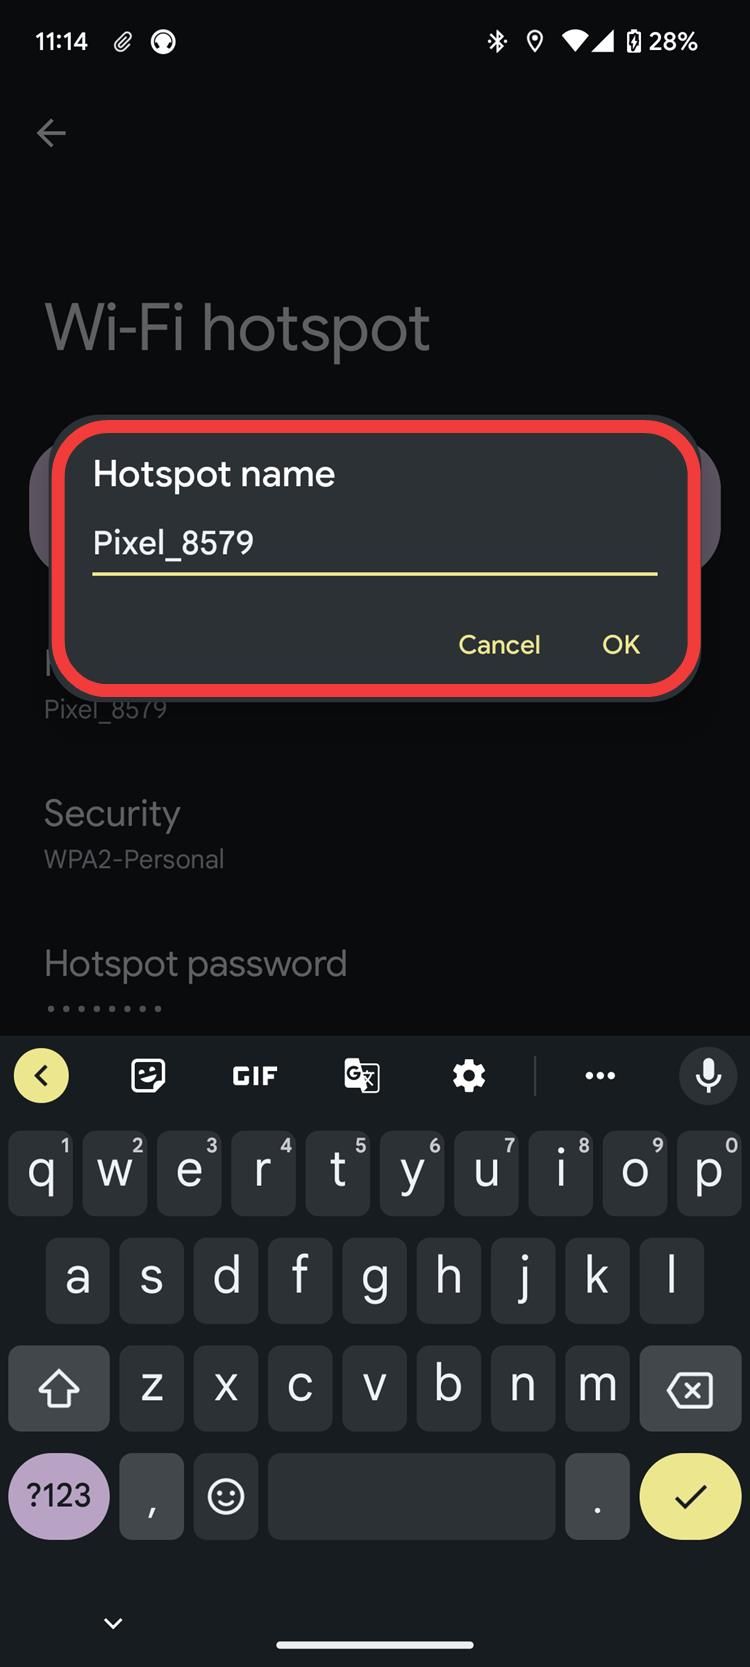 A screenshot of Android settings showing the Wi-Fi hotspot naming.